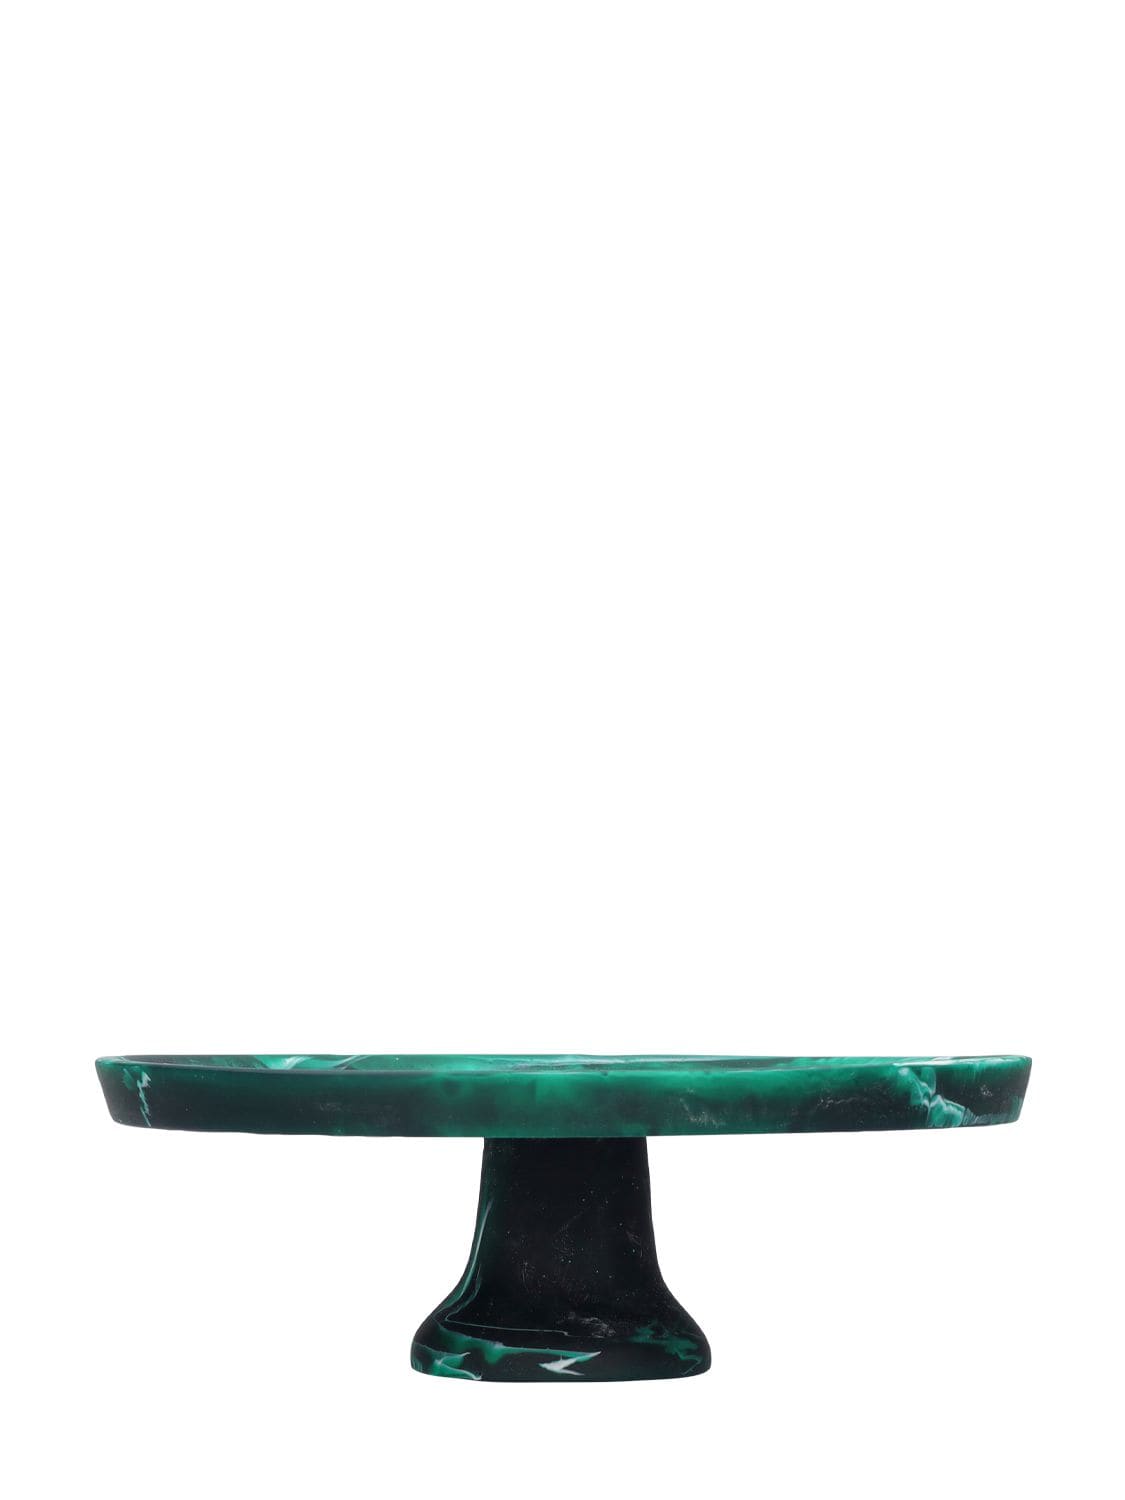 Image of Medium Footed Cake Stand